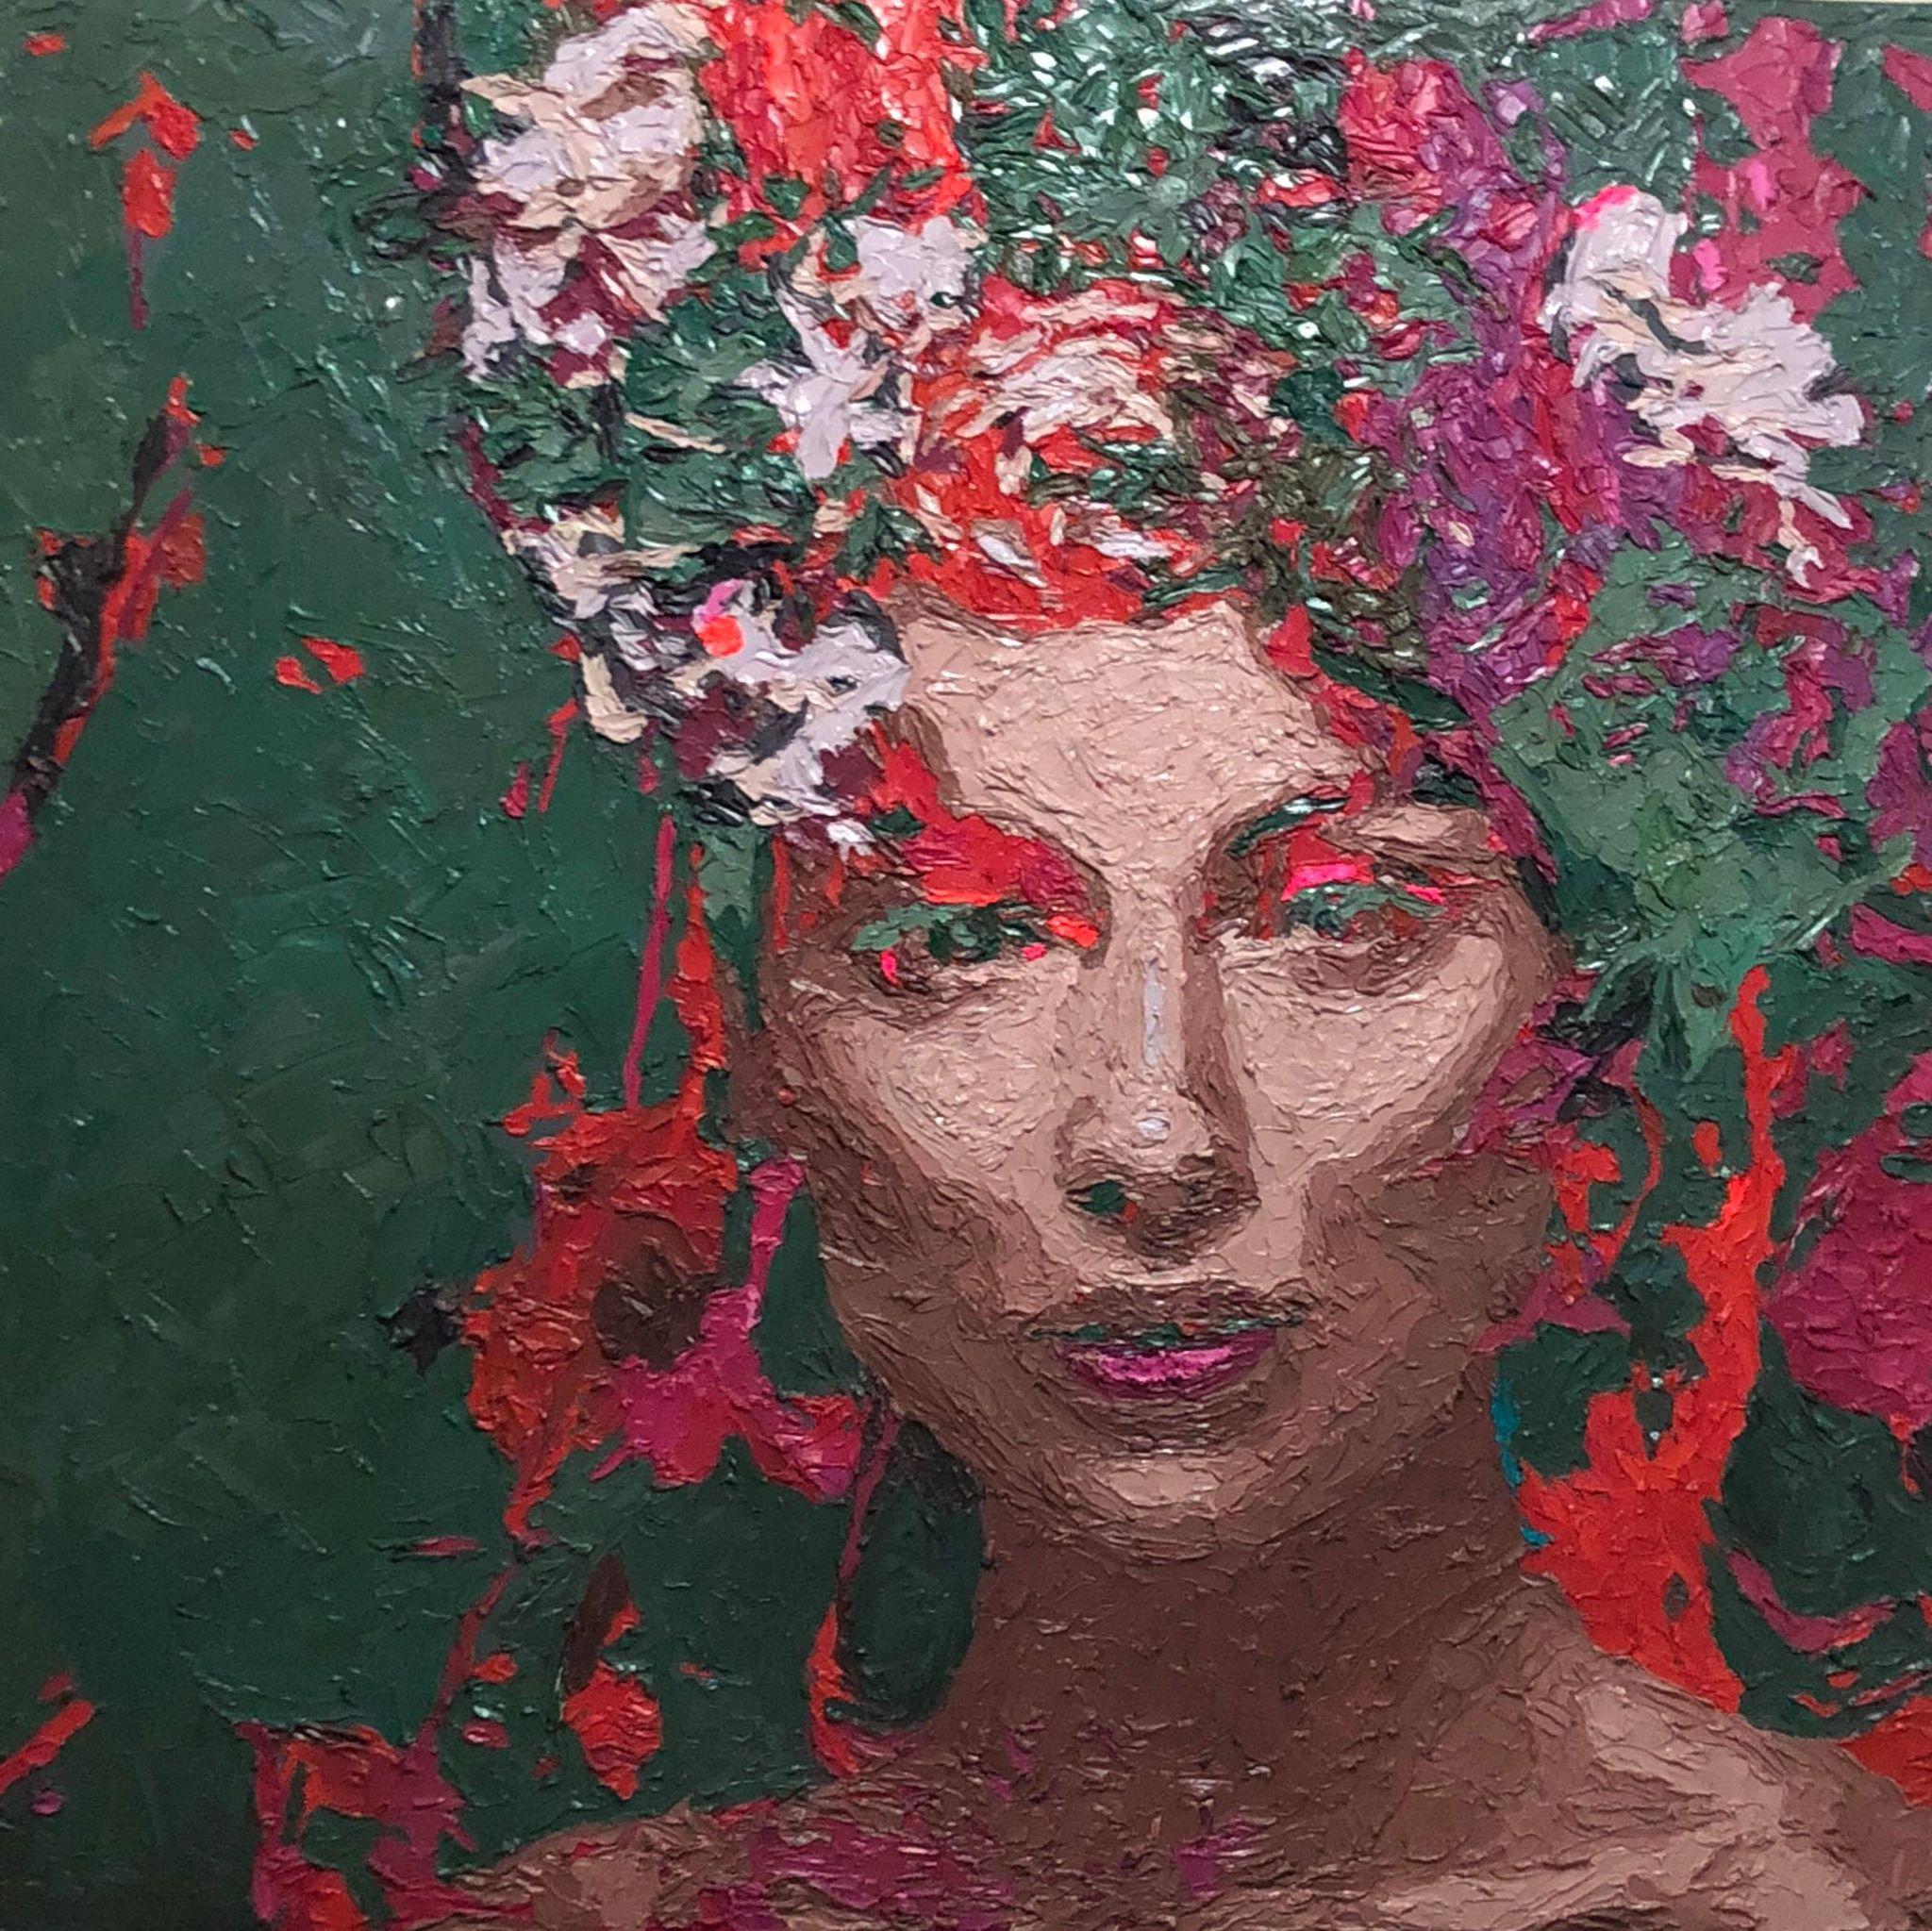 "A Floral Face"  (2018) by Hossam Dirar 
39” x 39”

ABOUT THE ARTIST
Hossam Dirar is an Egyptian contemporary artist based in Barcelona, Spain. 
He works with painting, video, sound, and installation art, to delve into questions of cultural